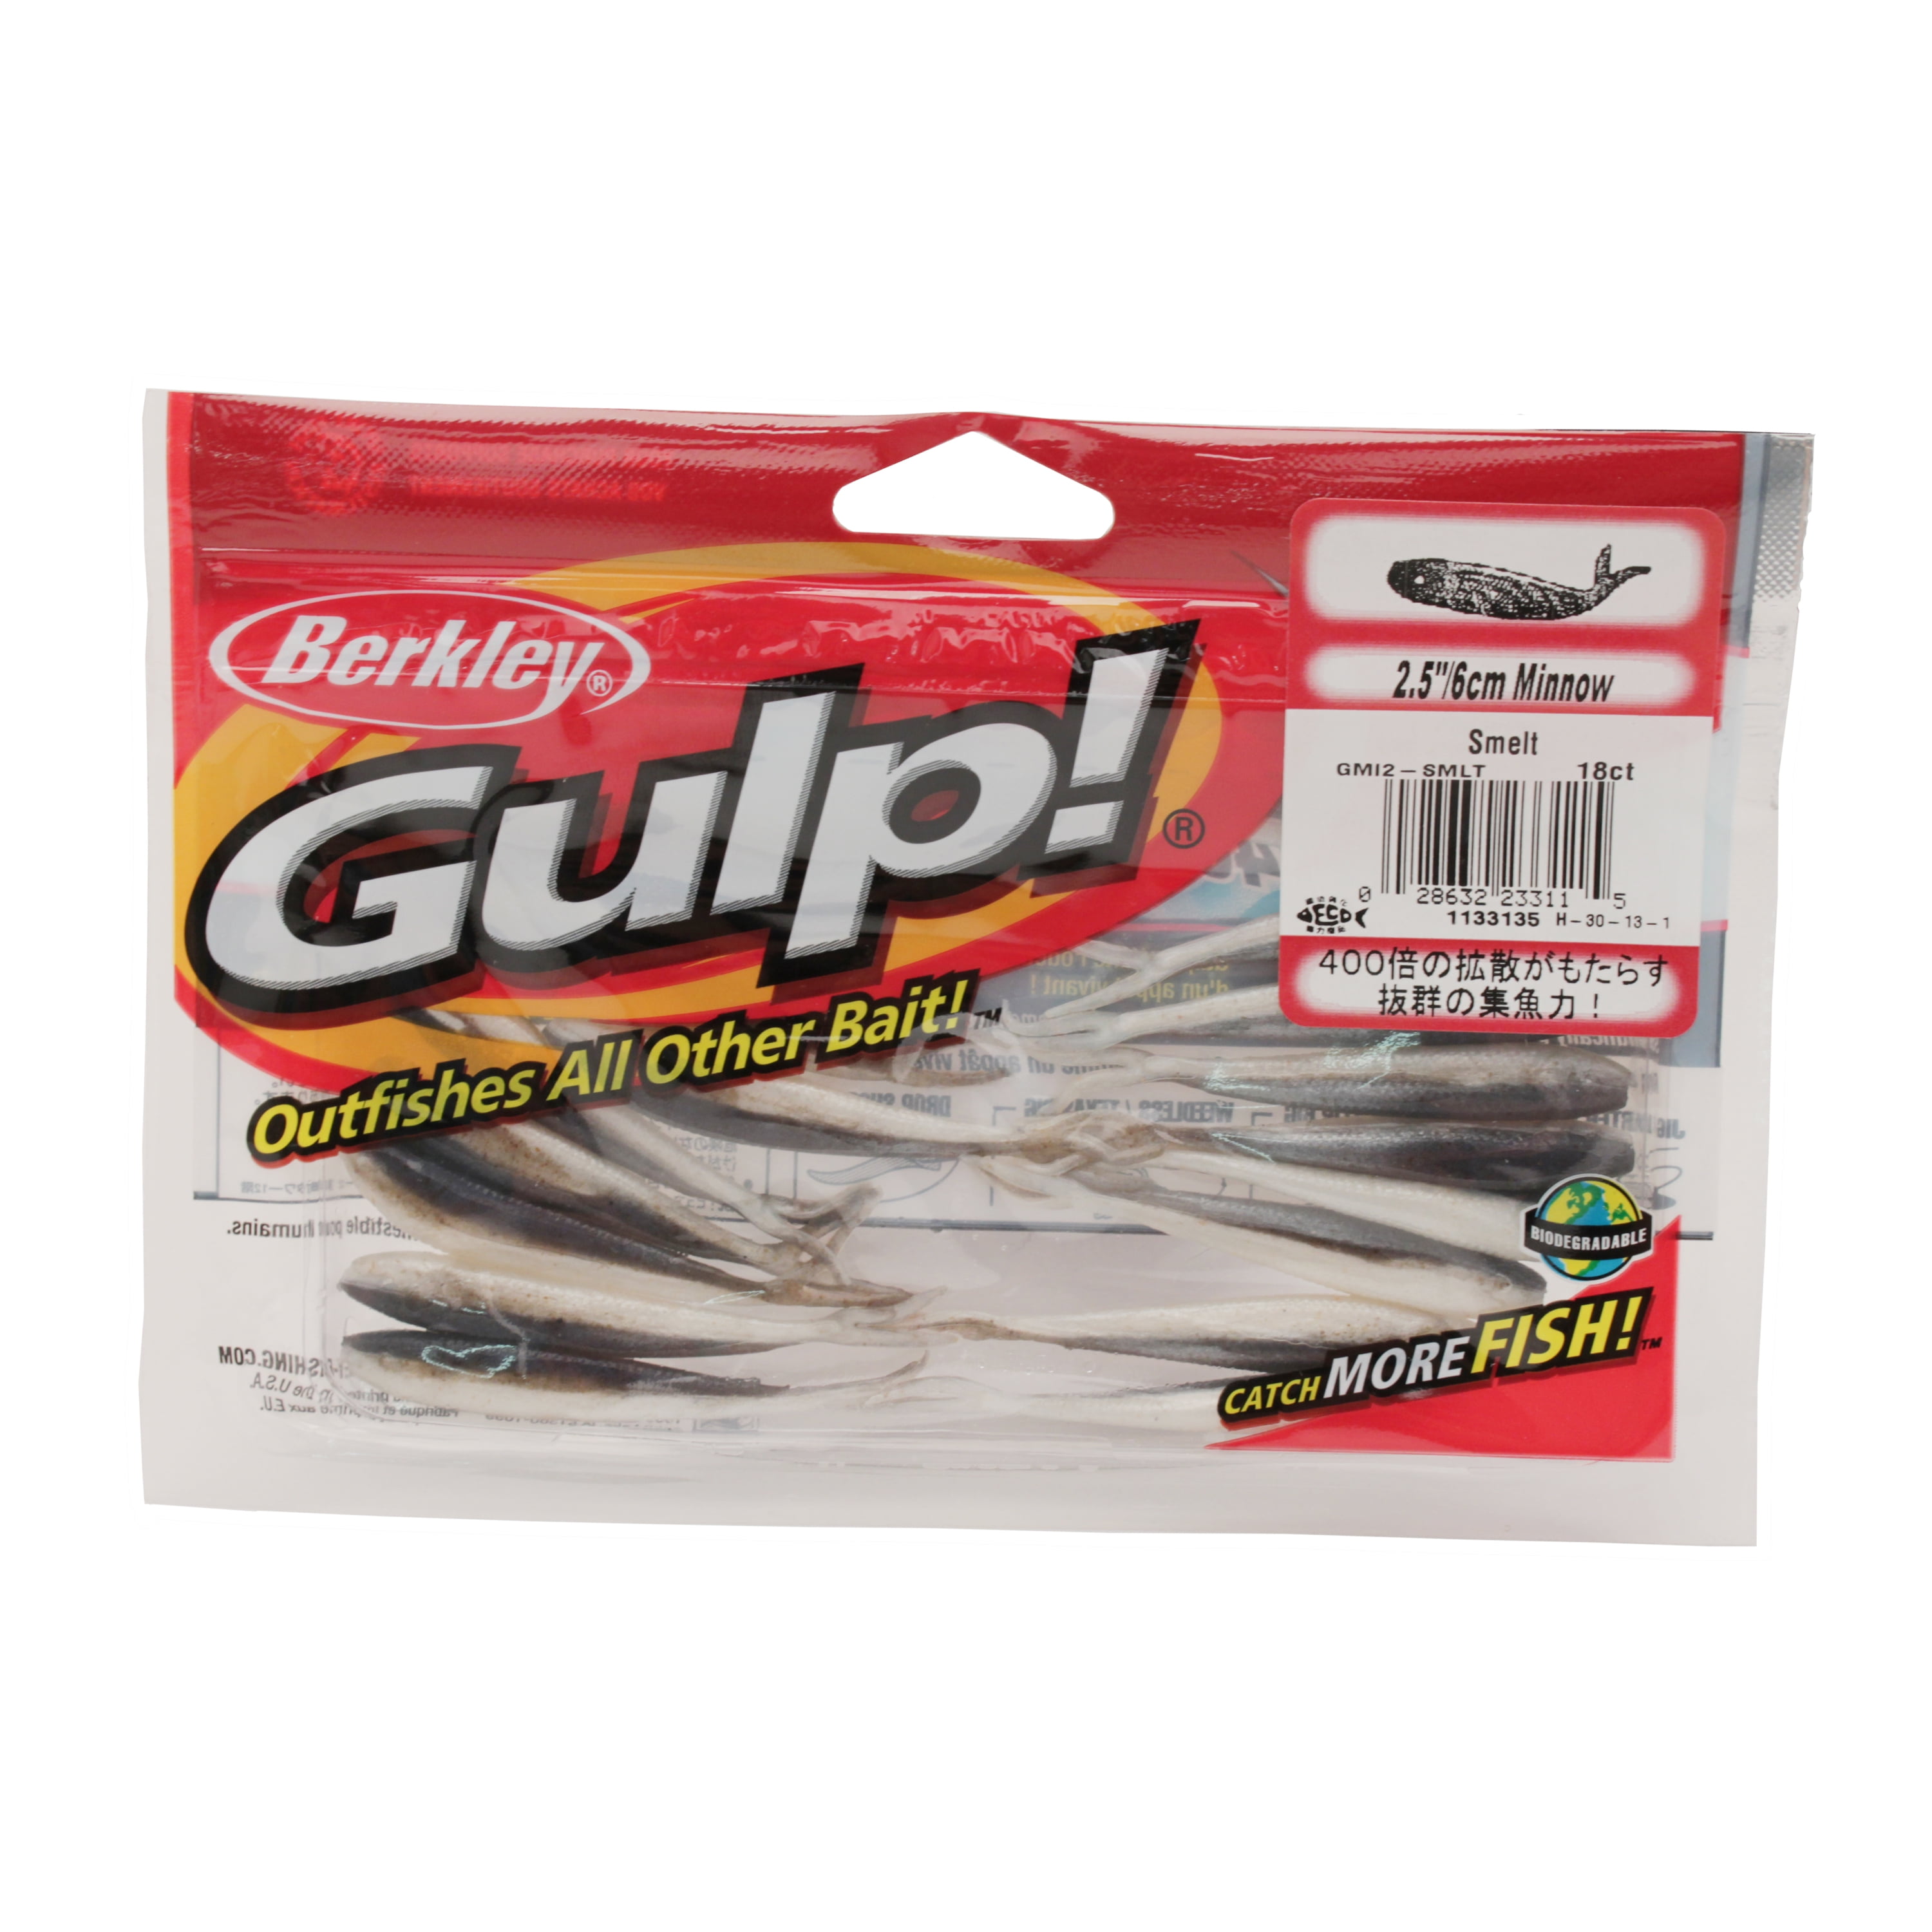 True North Baits - 1.25 'Lil Goby (Goby Bling, 8pk) - Soft Plastic Goby  golby Perch Crappie Bluegill Bait ice Fishing, Soft Plastic Lures -   Canada